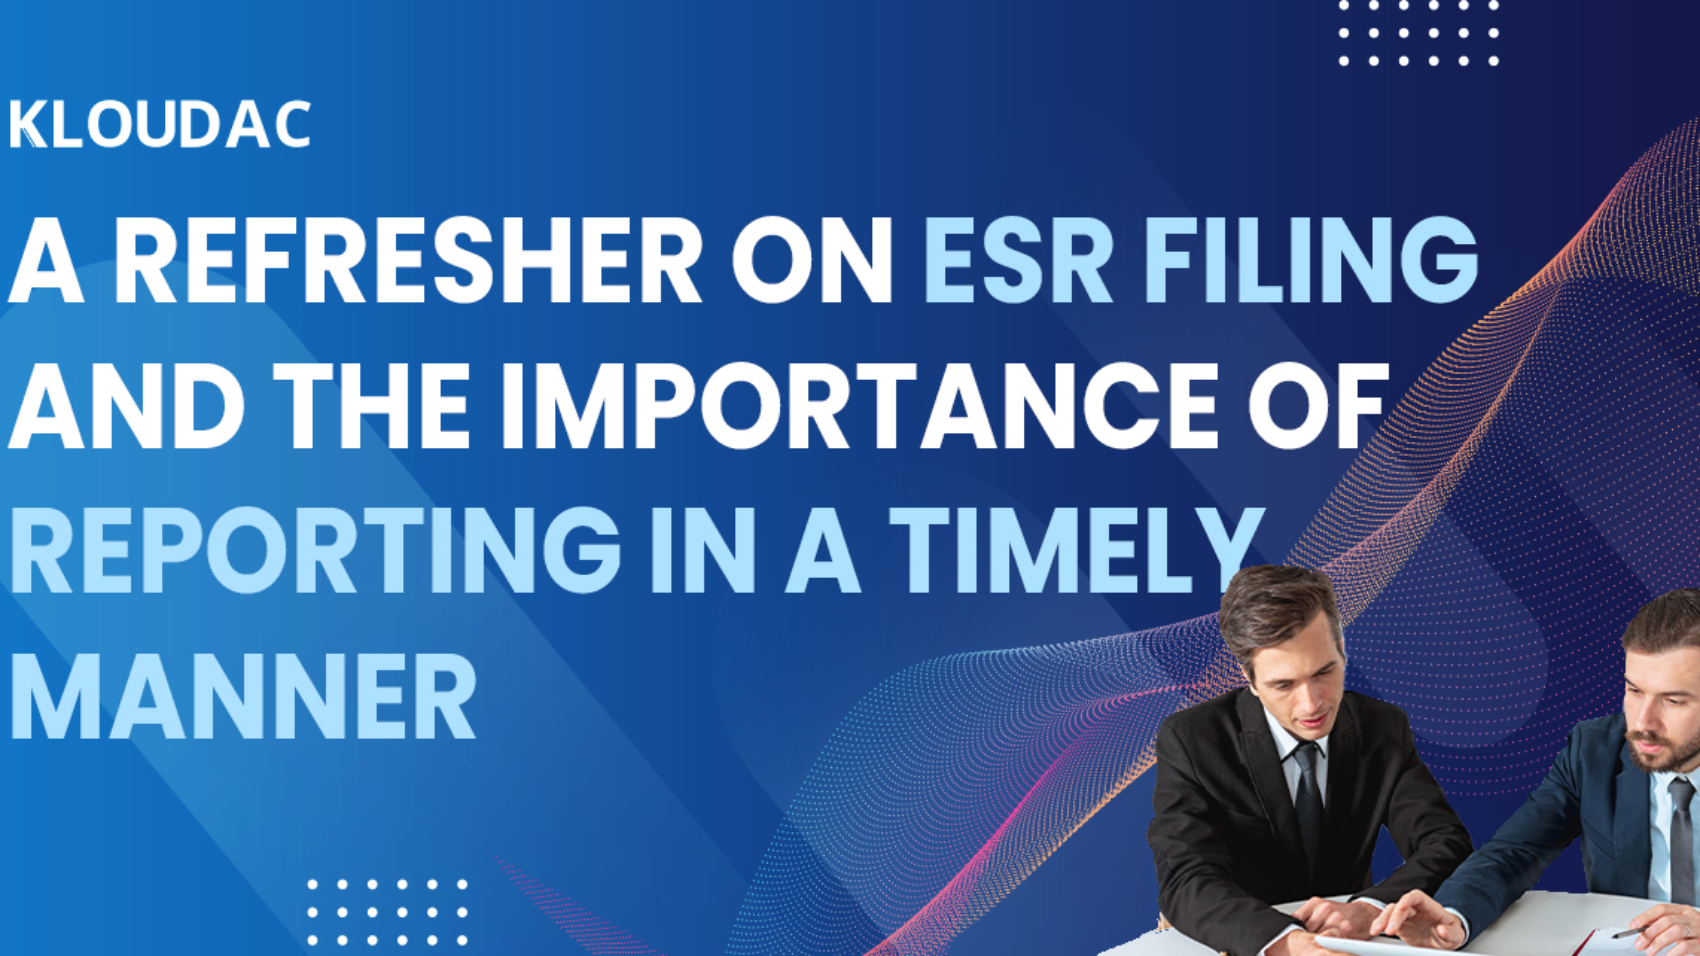 A refresher on ESR filing and the importance of reporting in a timely manner